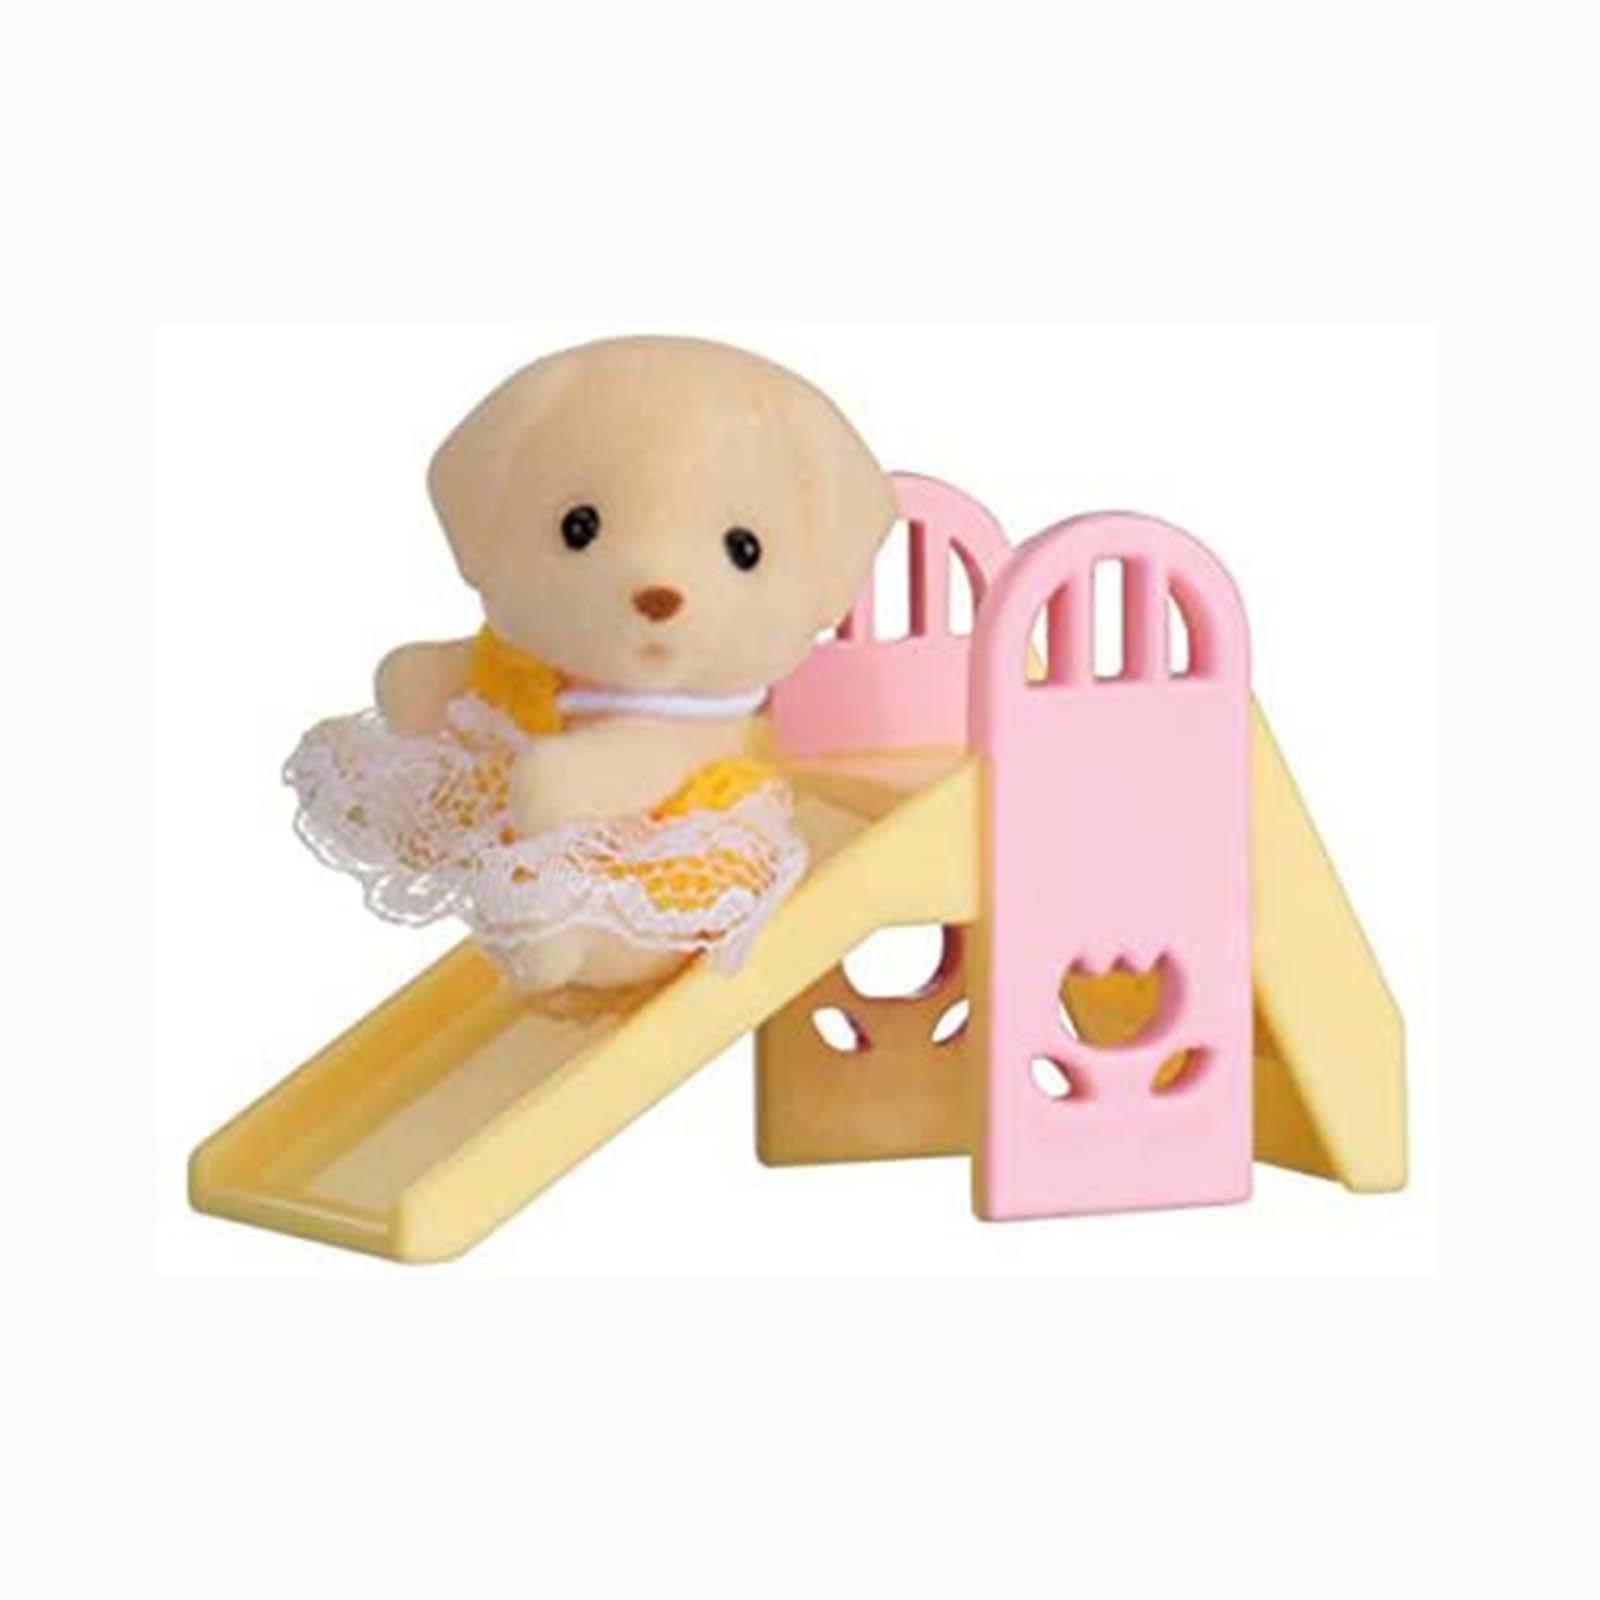 Calico Critters - Baby Critters In Carrying Cases Dog